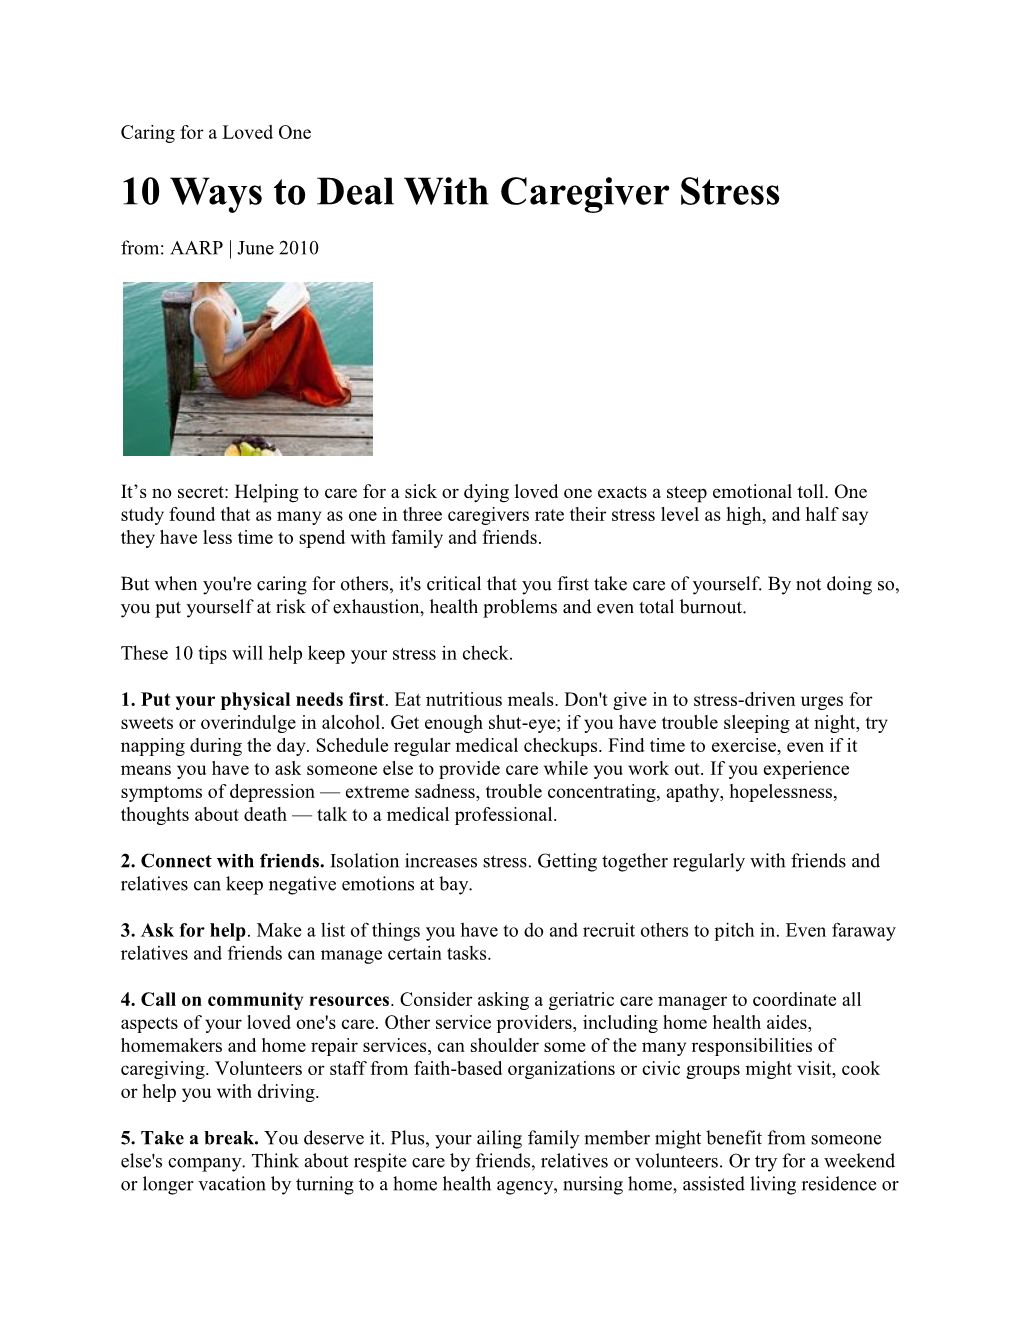 10 Ways to Deal with Caregiver Stress From: AARP | June 2010